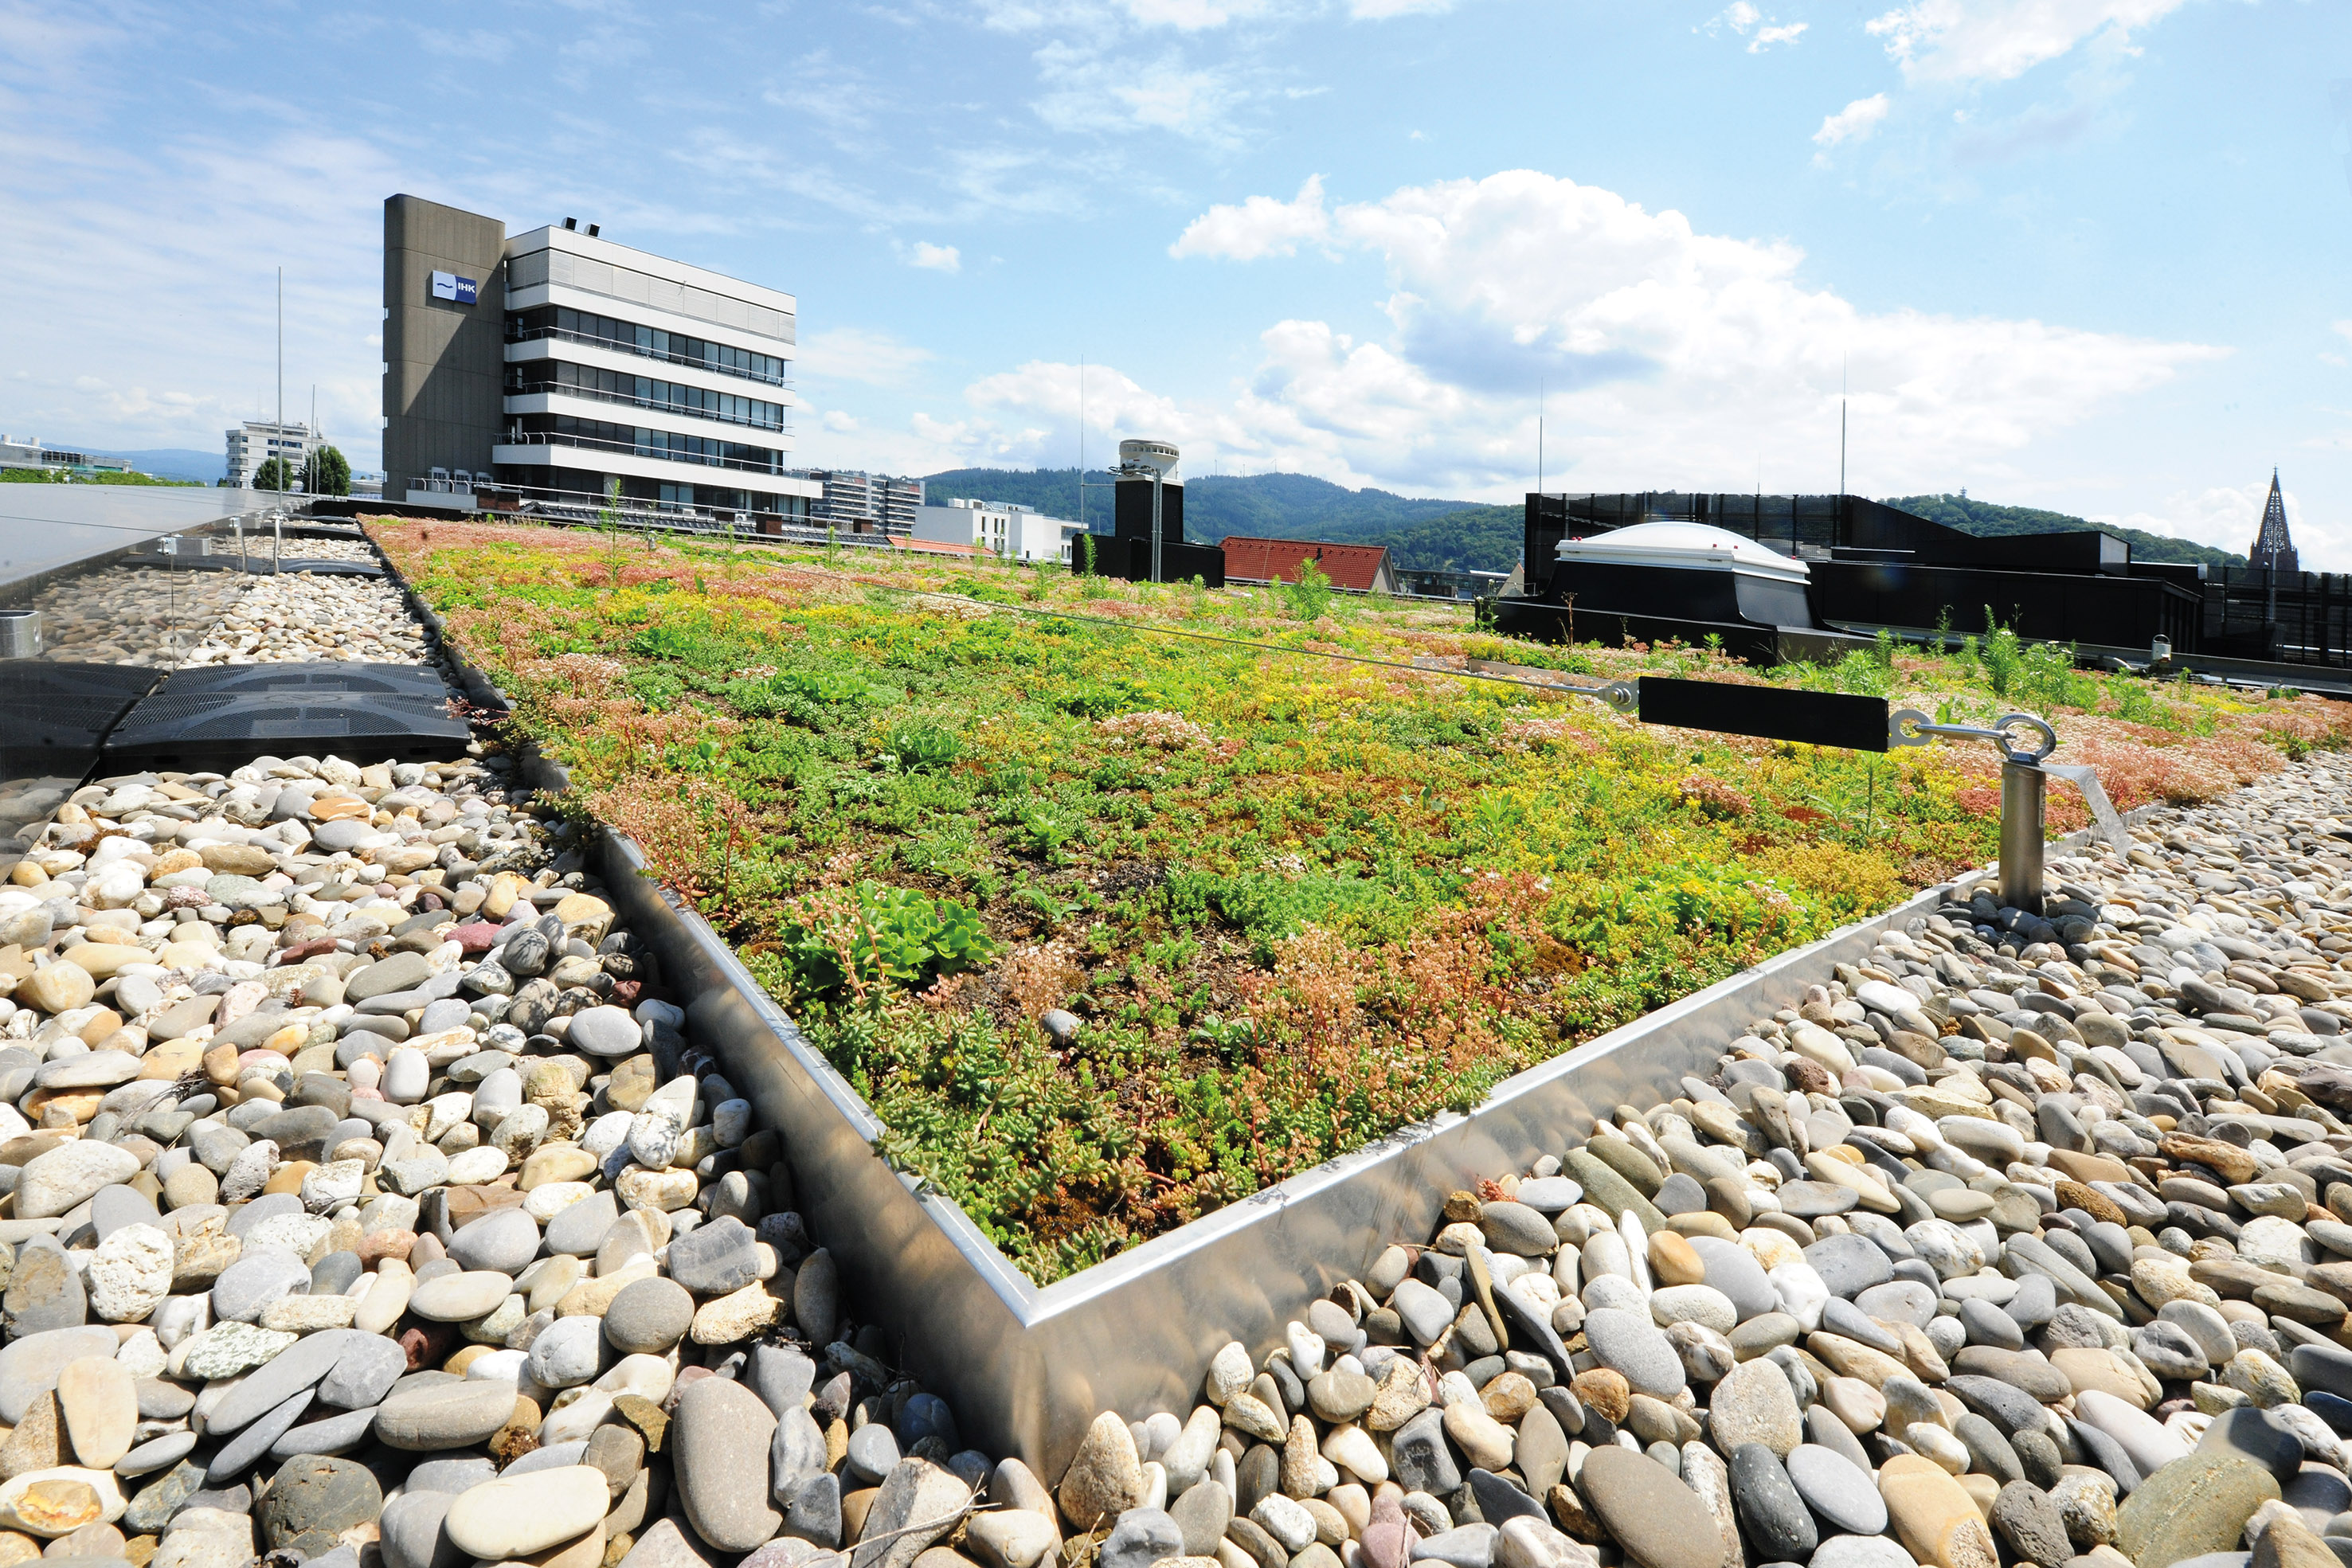 Green roofs are an ideal way of fully exploiting the potential of roof surfaces and are a good example of modern, sustainable construction. The company Richard Brink has brought three integrated systems for extensive roof planting on the market.  Photo: Richard Brink GmbH & Co. KG